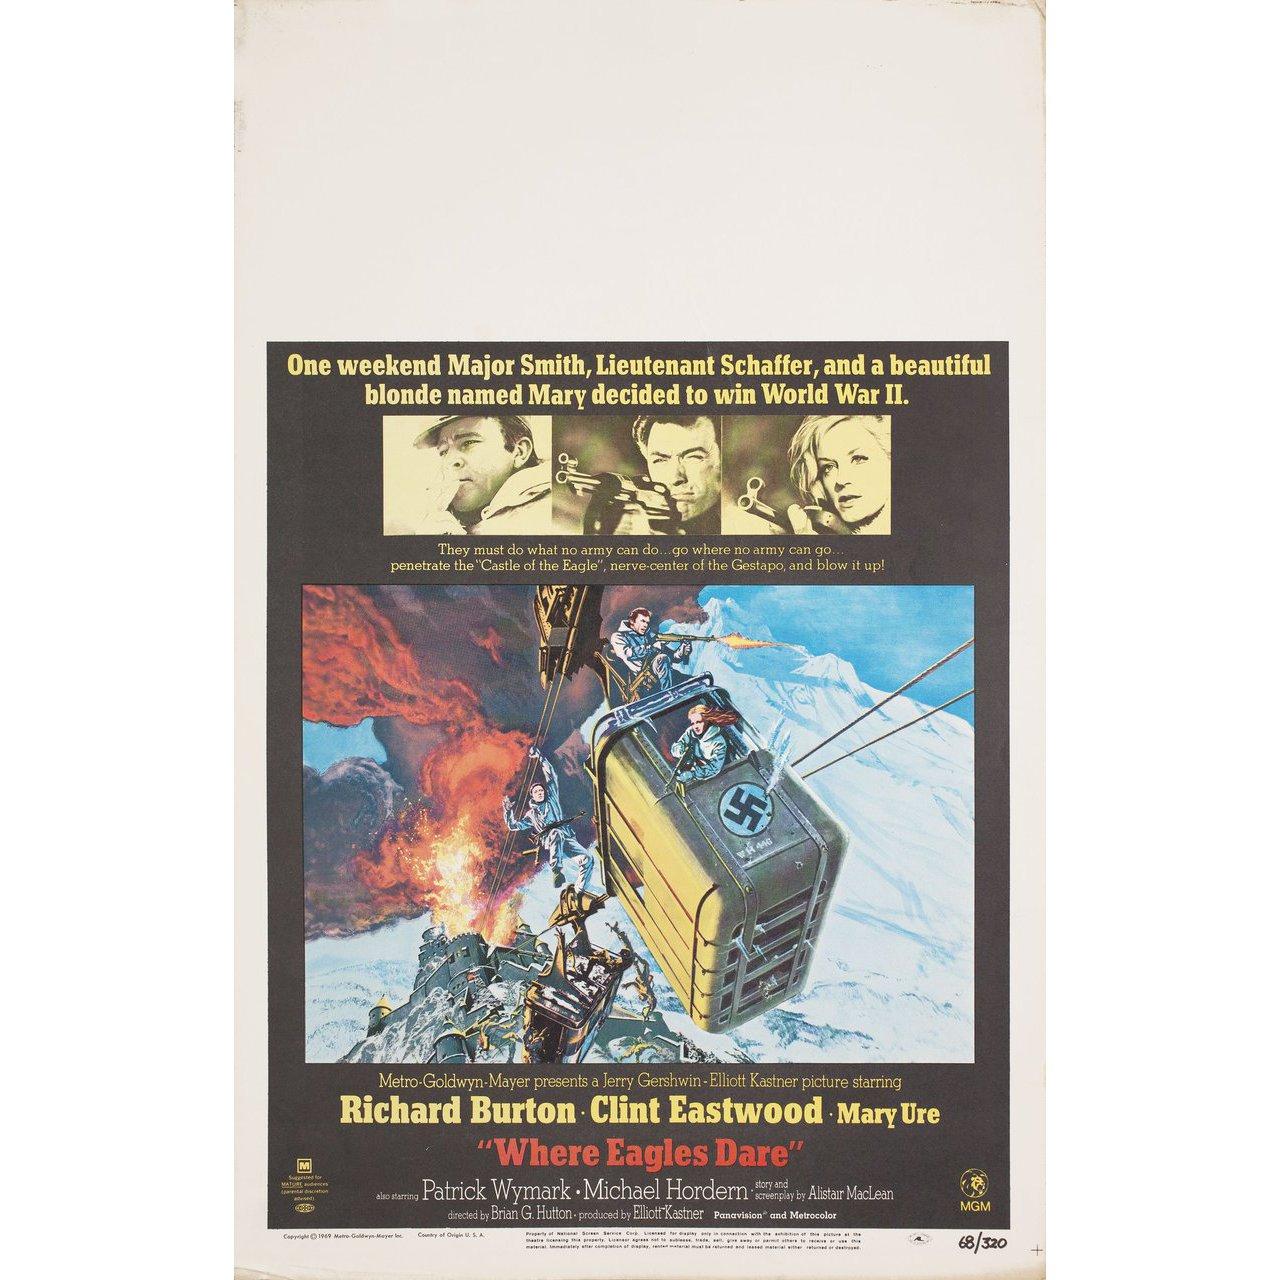 Original 1969 U.S. window card poster by Frank McCarthy for the film Where Eagles Dare directed by Brian G. Hutton with Richard Burton / Clint Eastwood / Mary Ure / Patrick Wymark. Very Good-Fine condition, rolled. Please note: the size is stated in